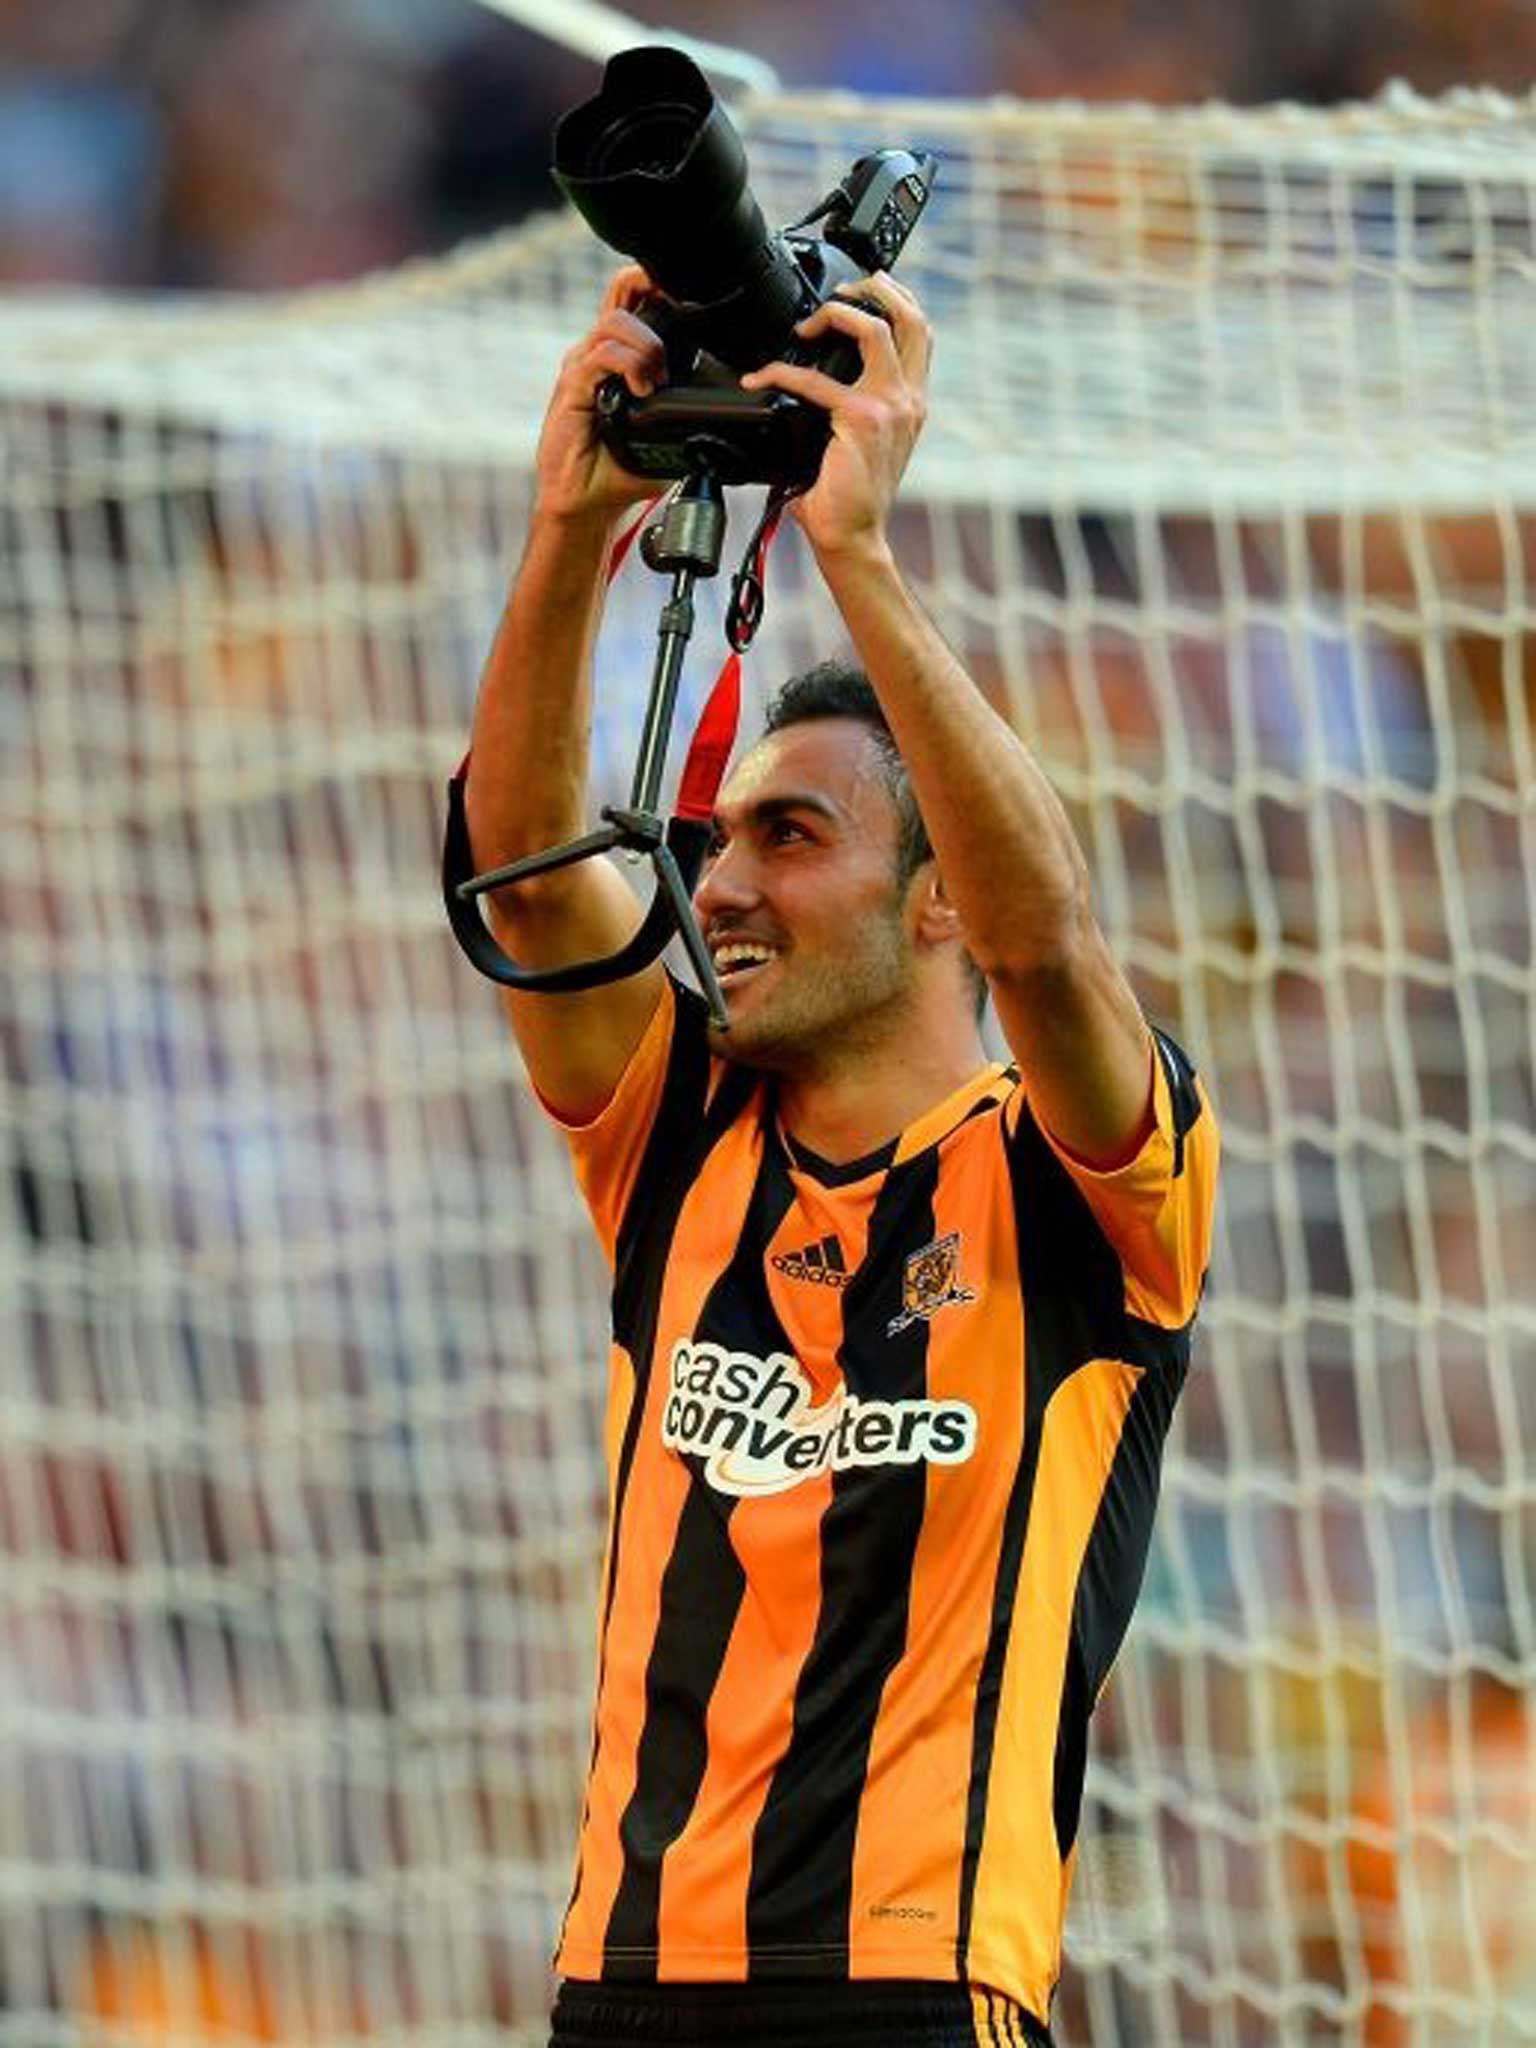 Point and shoot: Ahmed El-Mohamady shows how effective he can be as a photographer